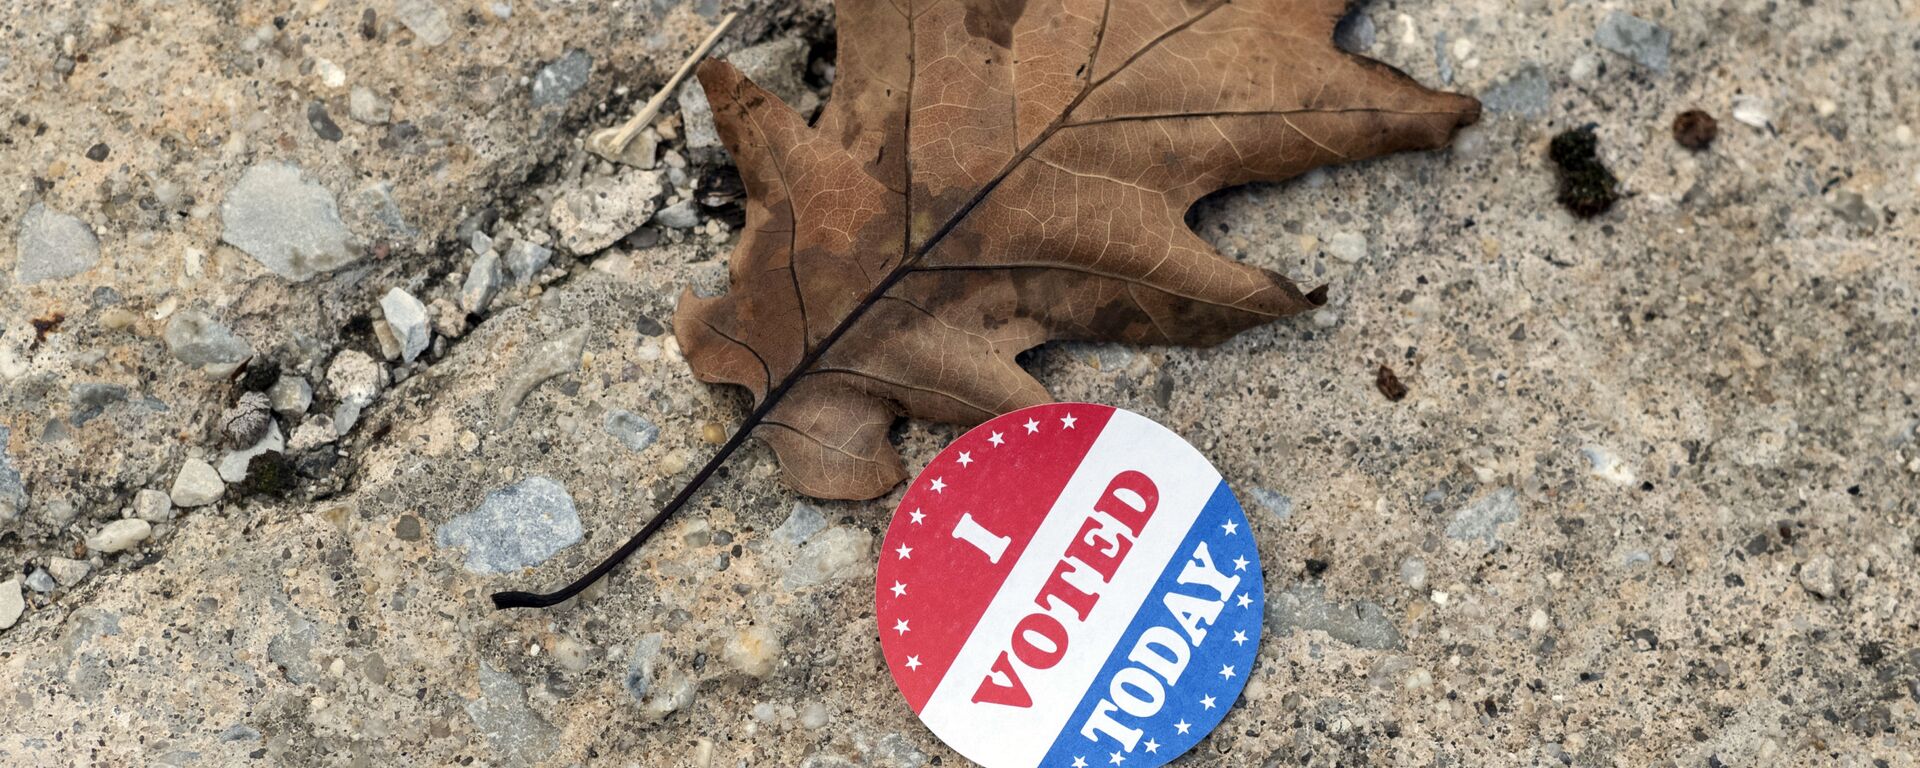 A discarded voting sticker lies on the ground at a satellite election office at Overbrook High School on Thursday, Oct. 1, 2020, in Philadelphia. The city of Philadelphia has opened several satellite election offices and more are slated to open in the coming weeks where voters can drop off their mail in ballots before Election Day.  - Sputnik International, 1920, 15.02.2023